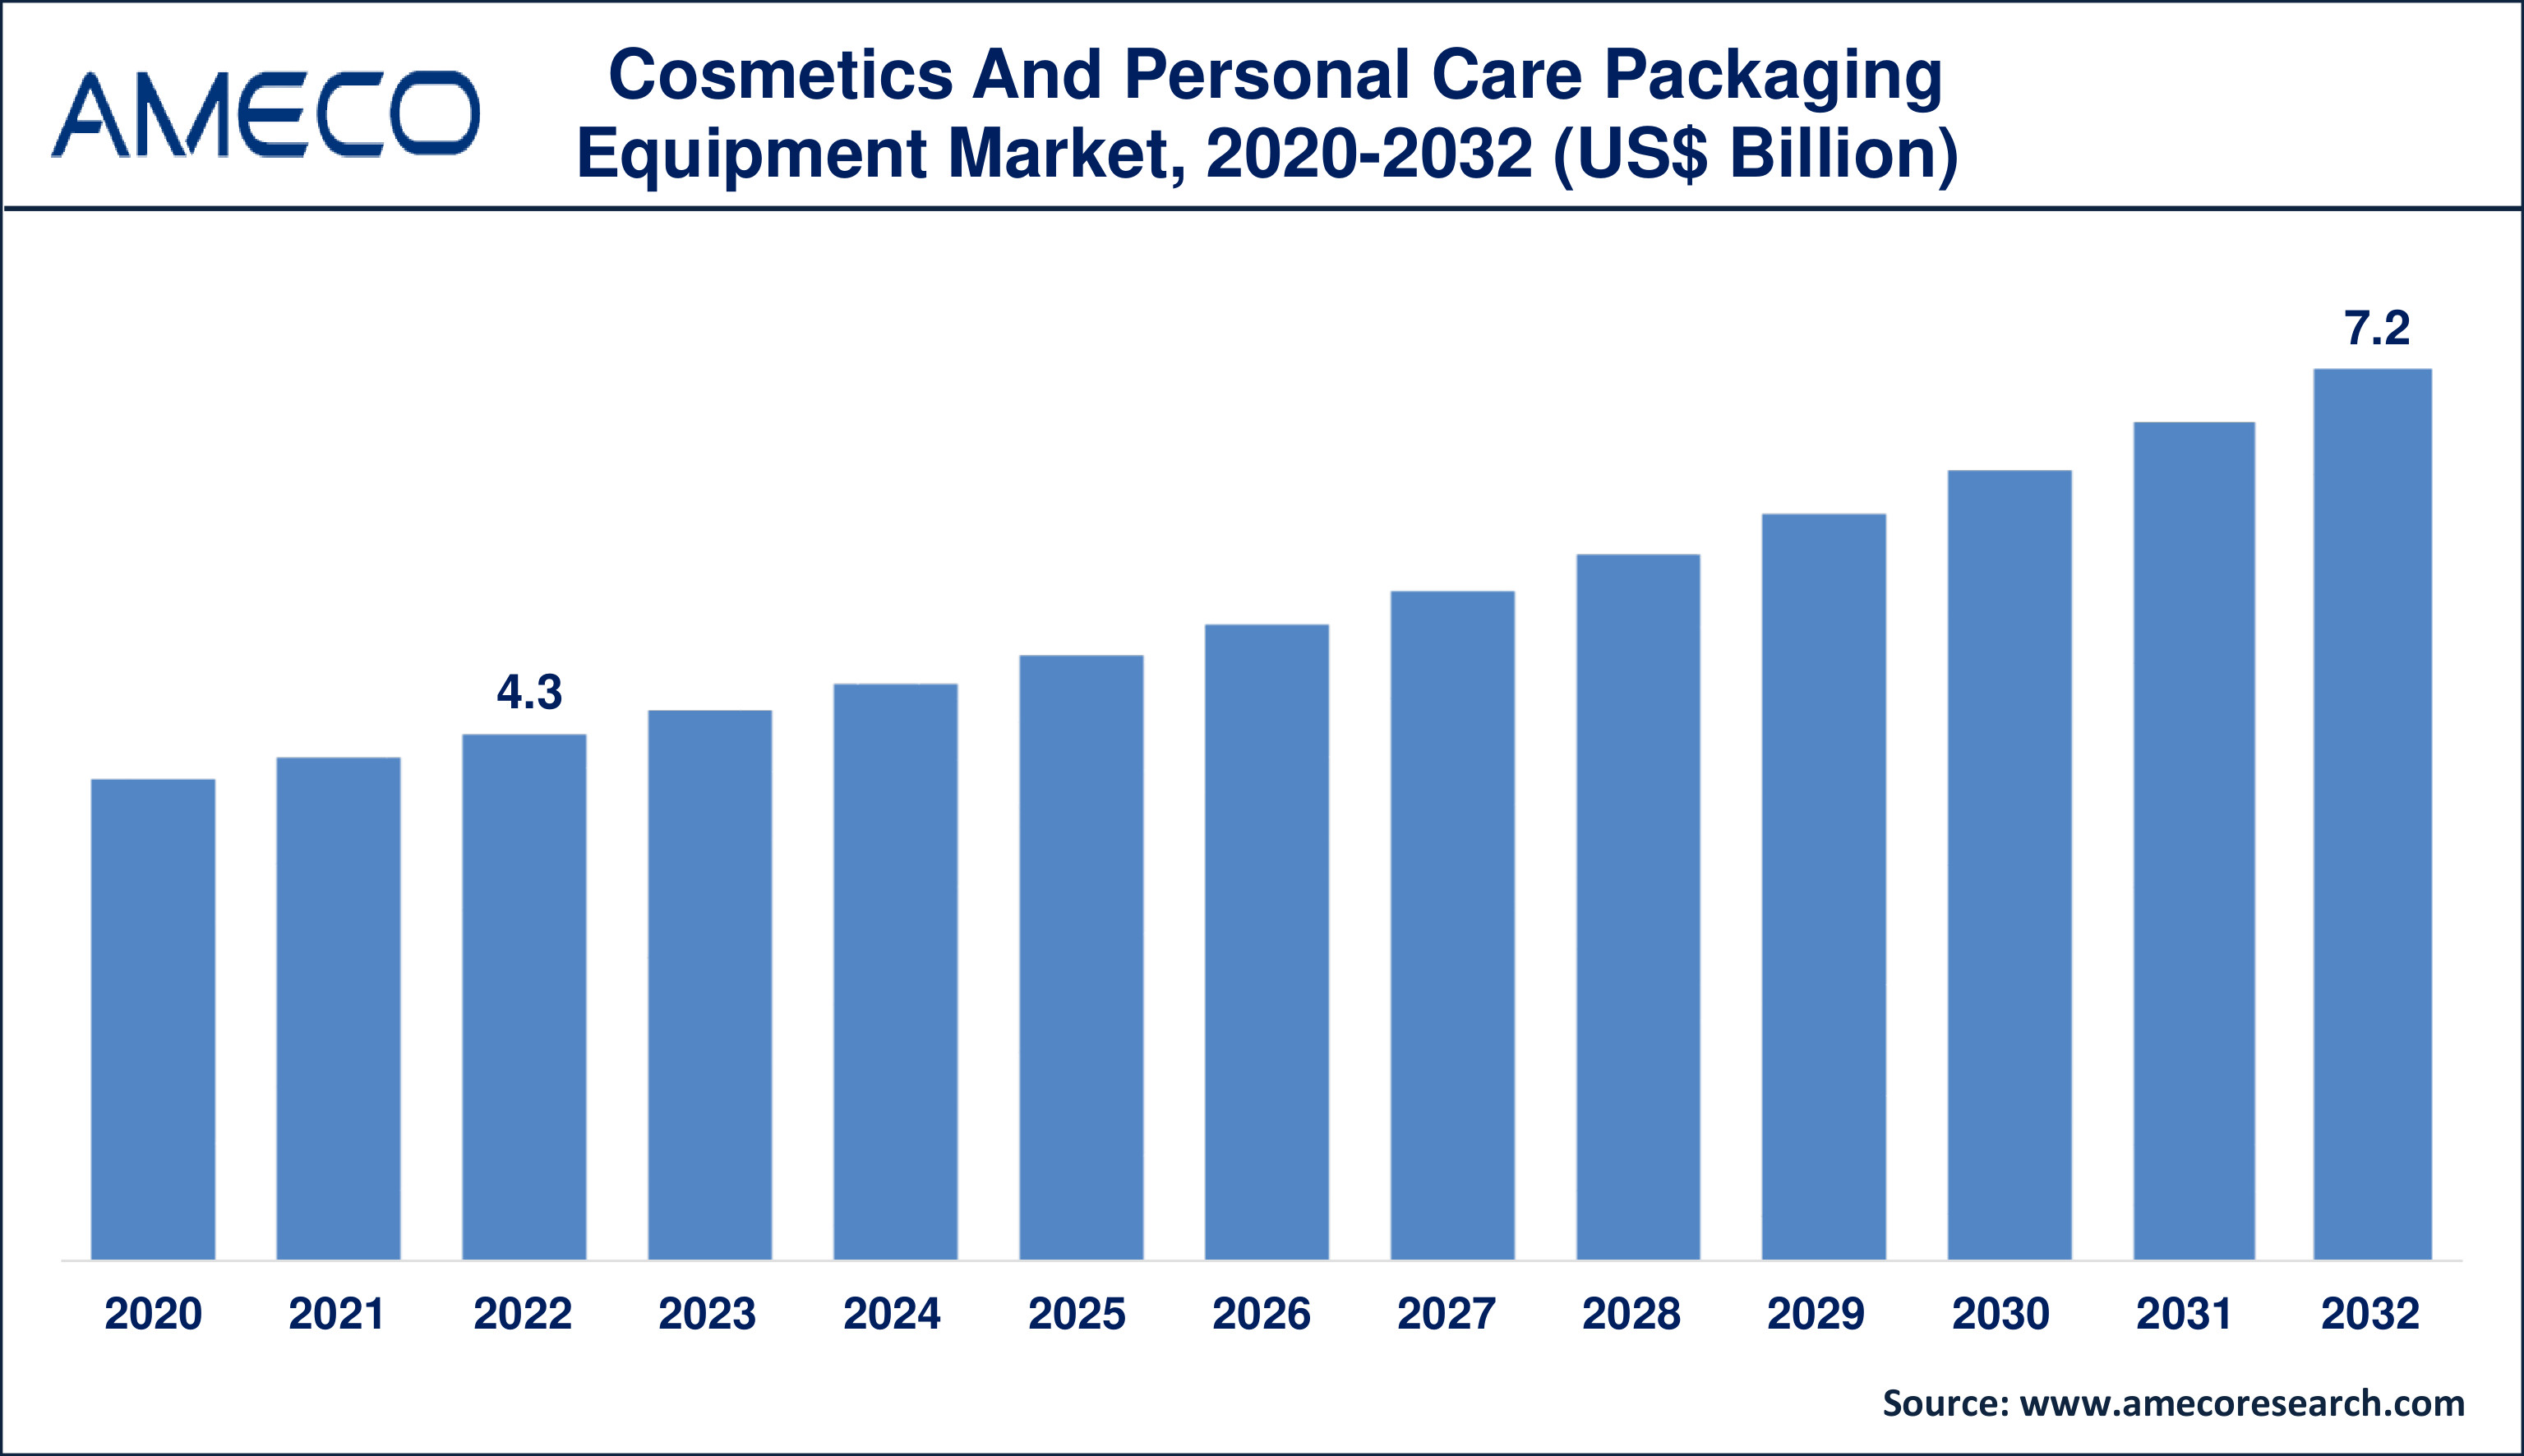 Cosmetics and Personal Care Packaging Equipment Market Dynamics